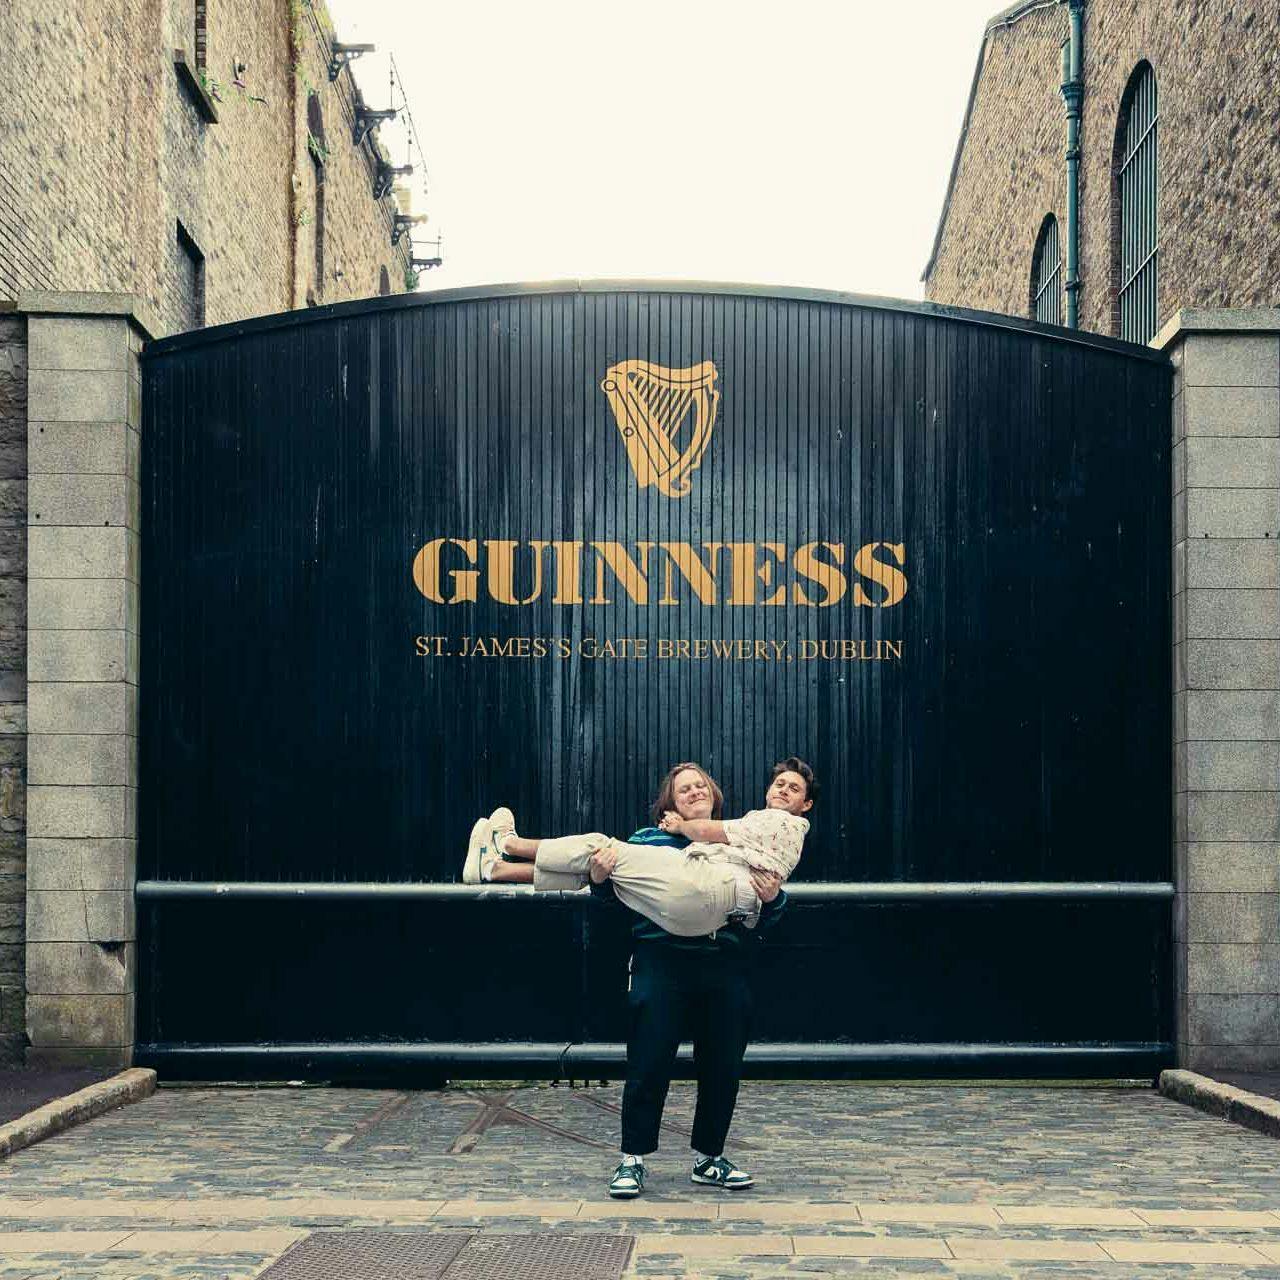 a woman is holding a man at the front gate of guinness